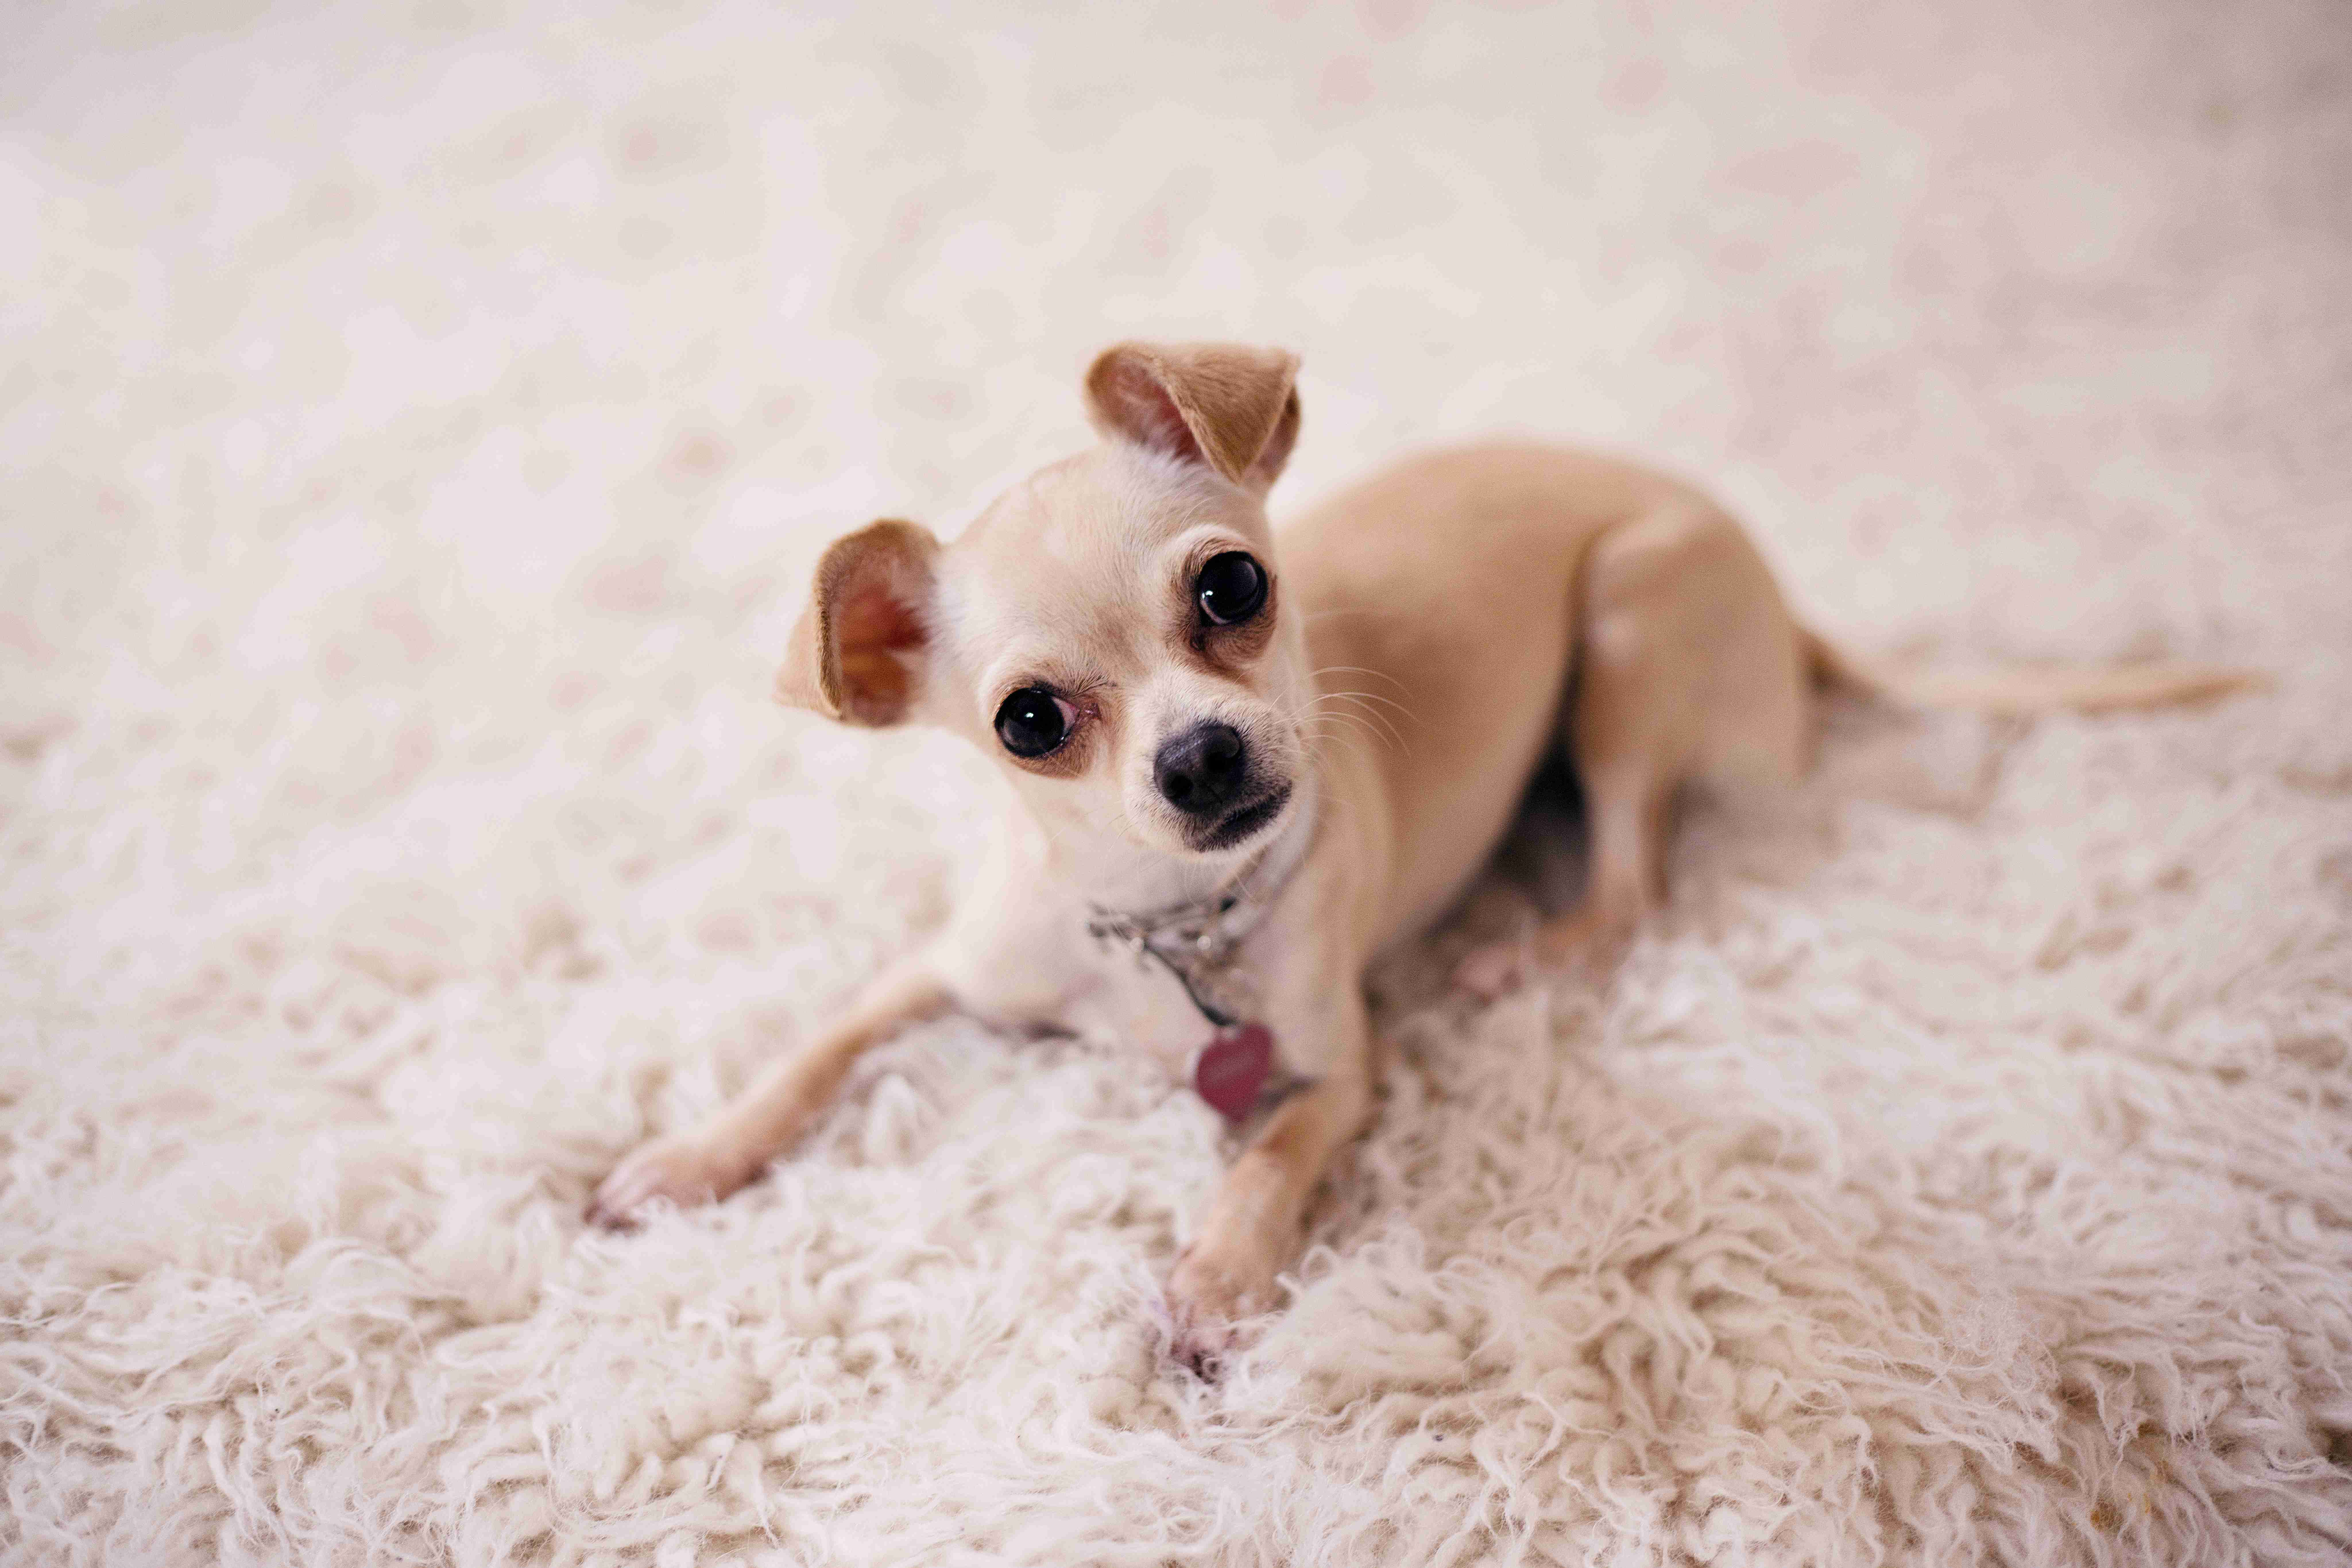 Can Chihuahuas learn to play nicely with other dogs?